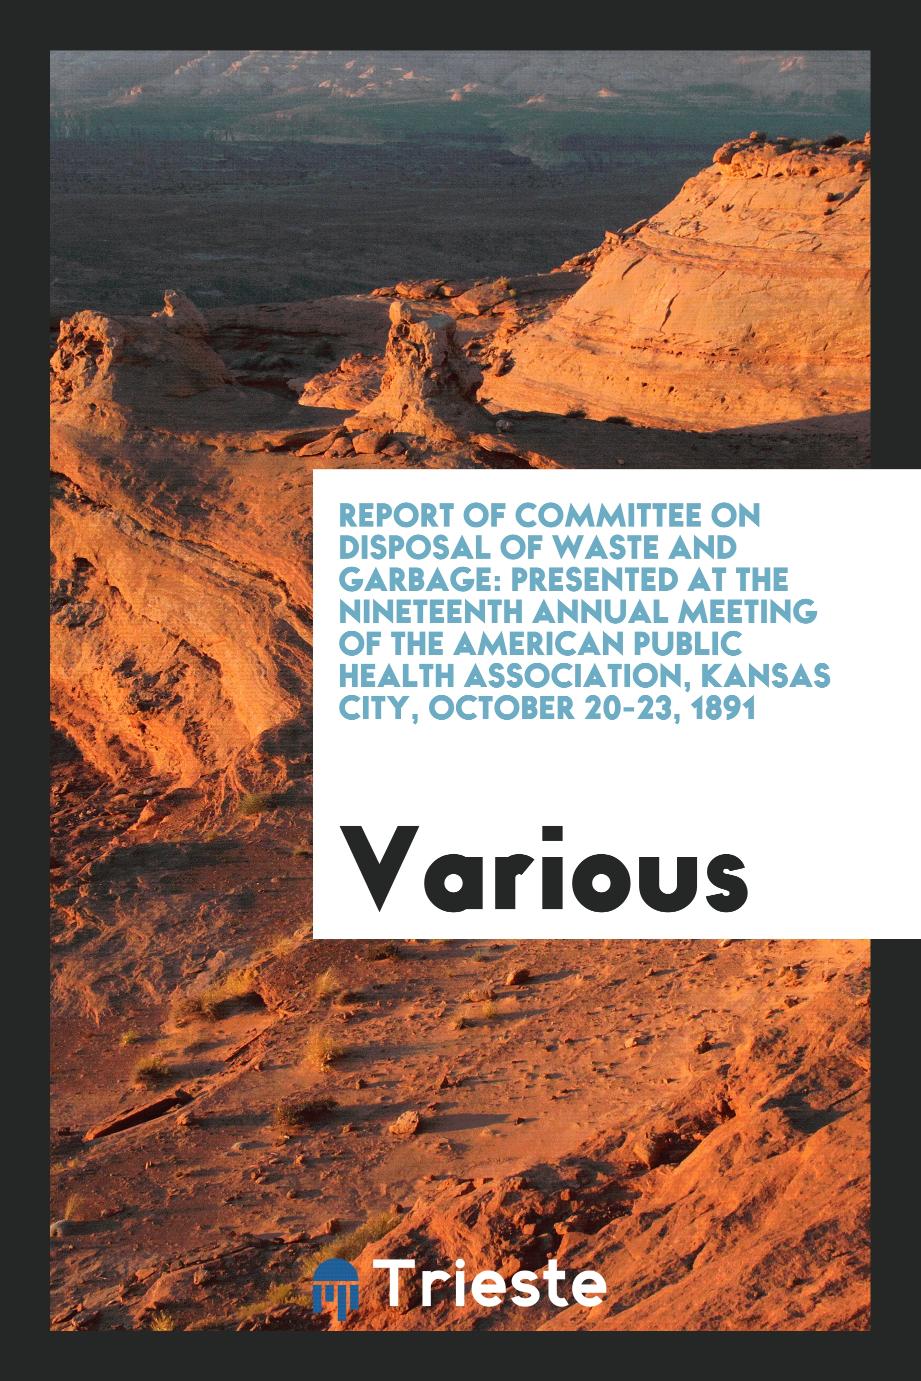 Report of Committee on disposal of waste and garbage: Presented at the Nineteenth Annual Meeting of the American Public Health Association, Kansas City, October 20-23, 1891